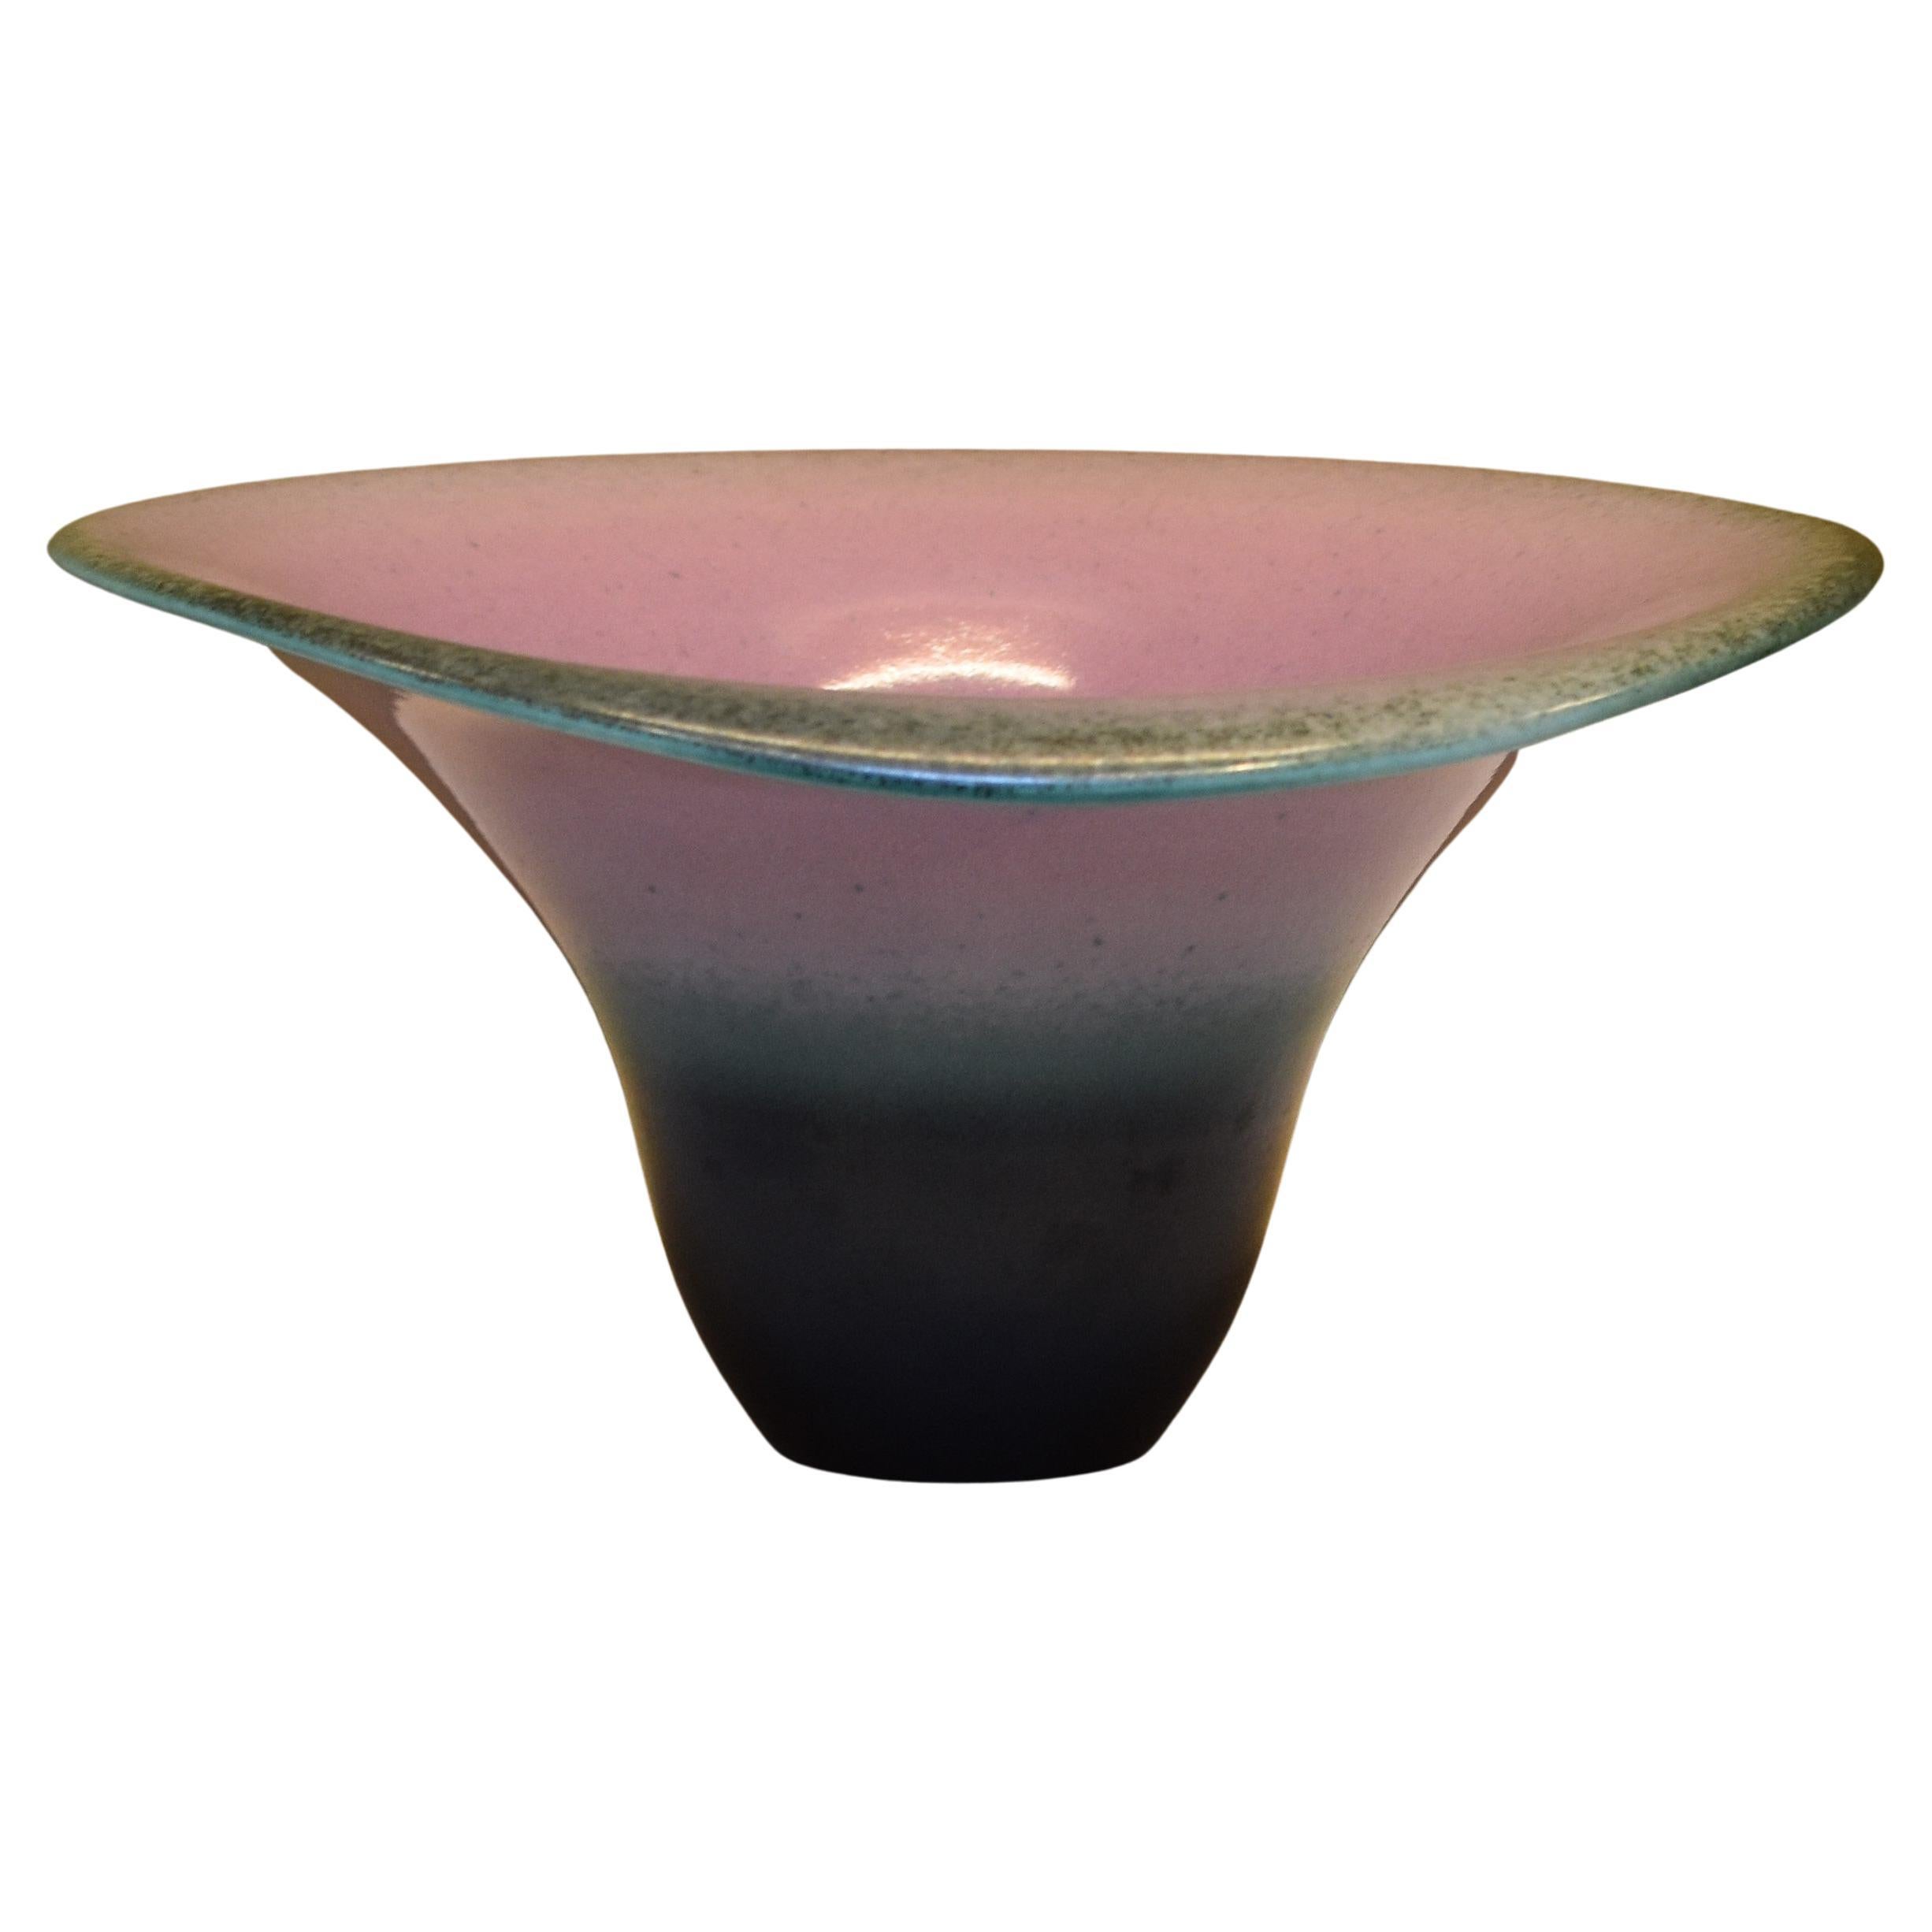 Extraordinary museum quality Japanese contemporary hand-glazed signed decorative porcelain vase/centerpiece in a breathtaking, graceful flared shape in stunning combination of rose, green and black, a mesmerizing exhibition masterpiece by a highly